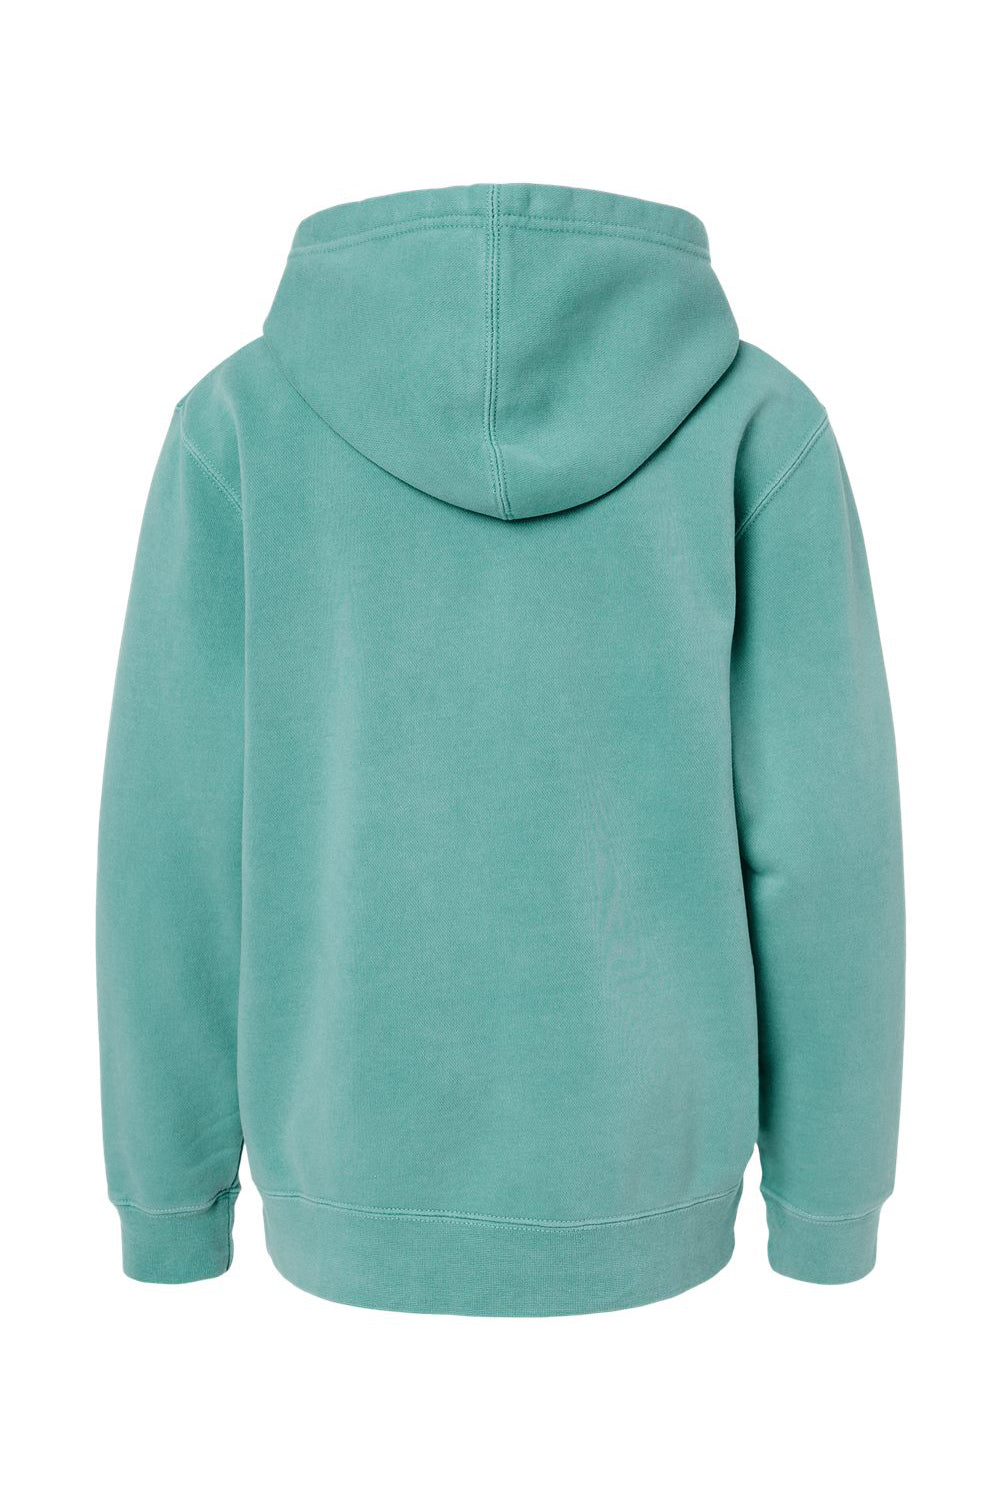 Independent Trading Co. PRM1500Y Youth Pigment Dyed Hooded Sweatshirt Hoodie Mint Green Flat Back